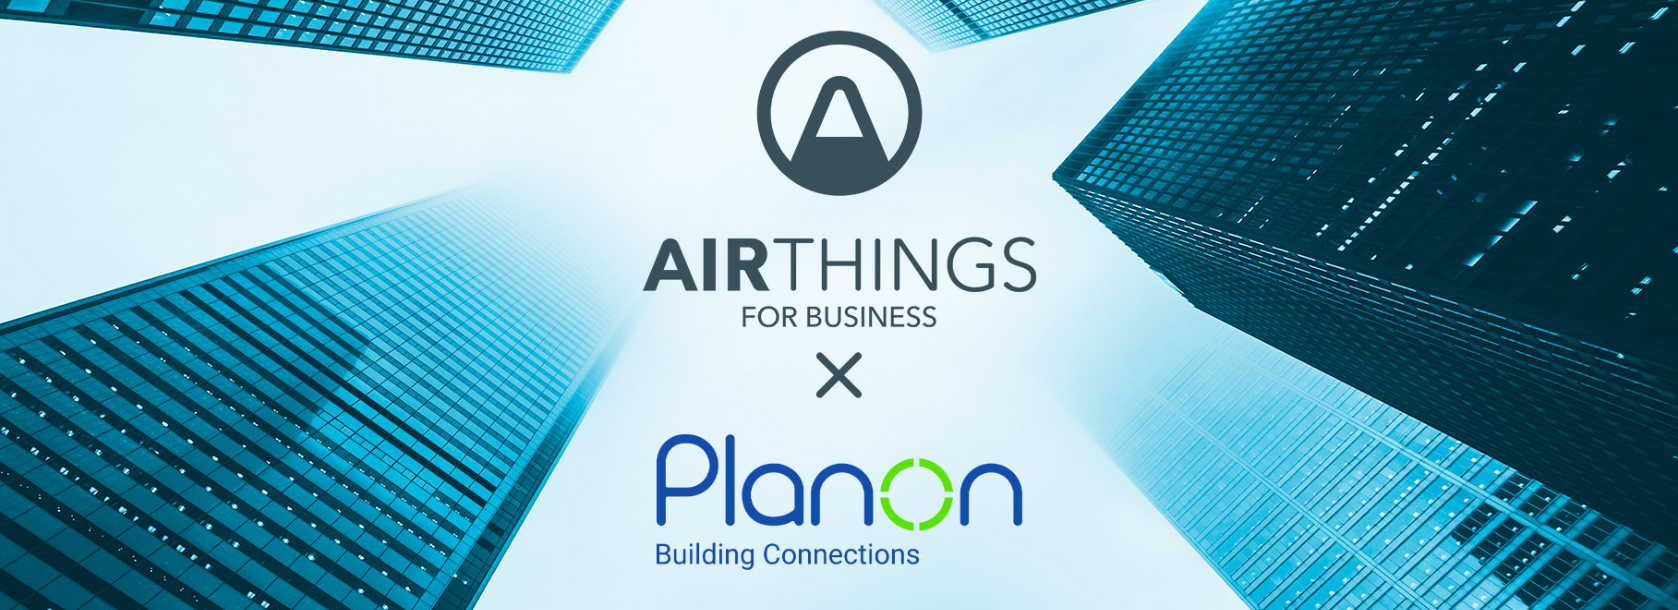 Airthings x Planon graphic